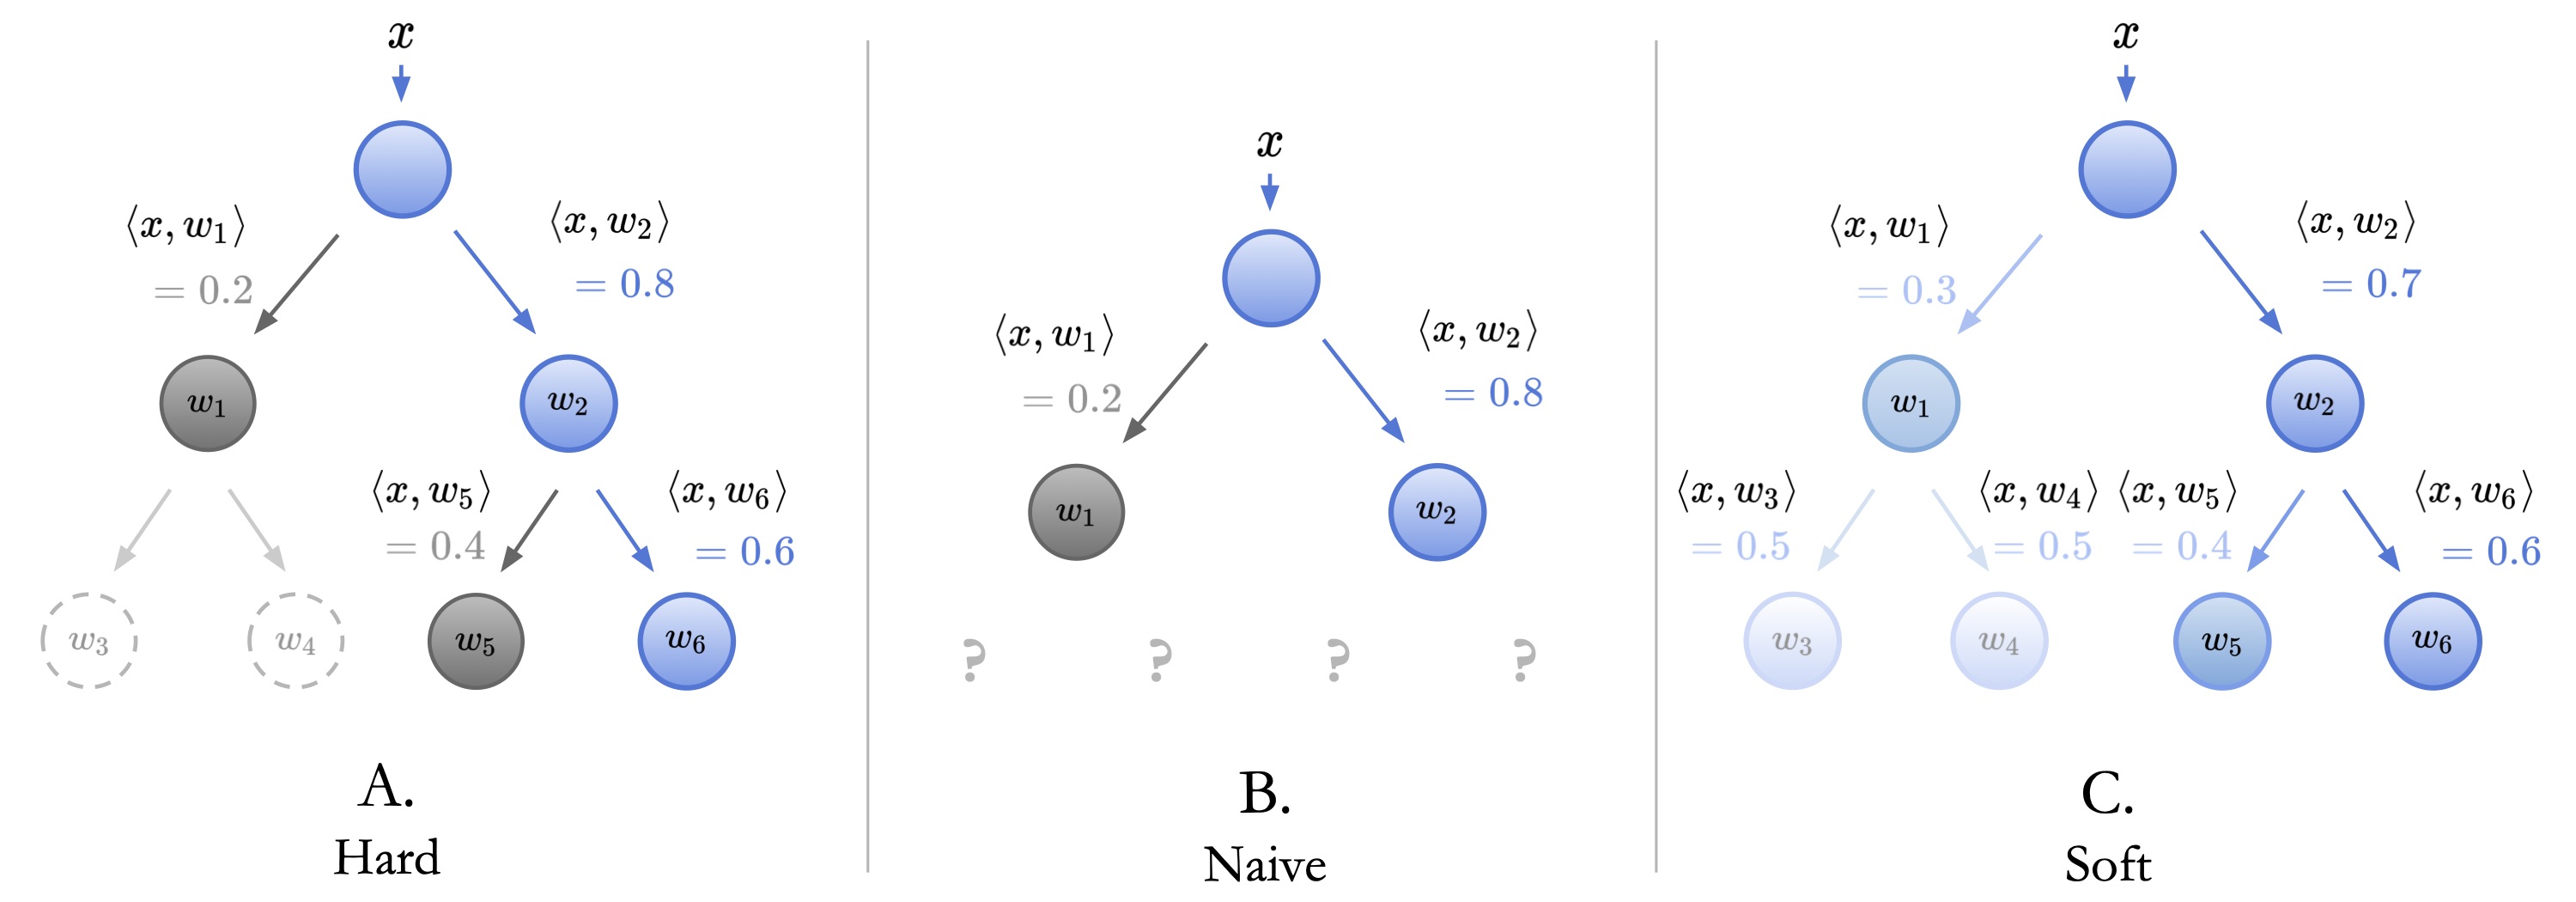 inference_modes